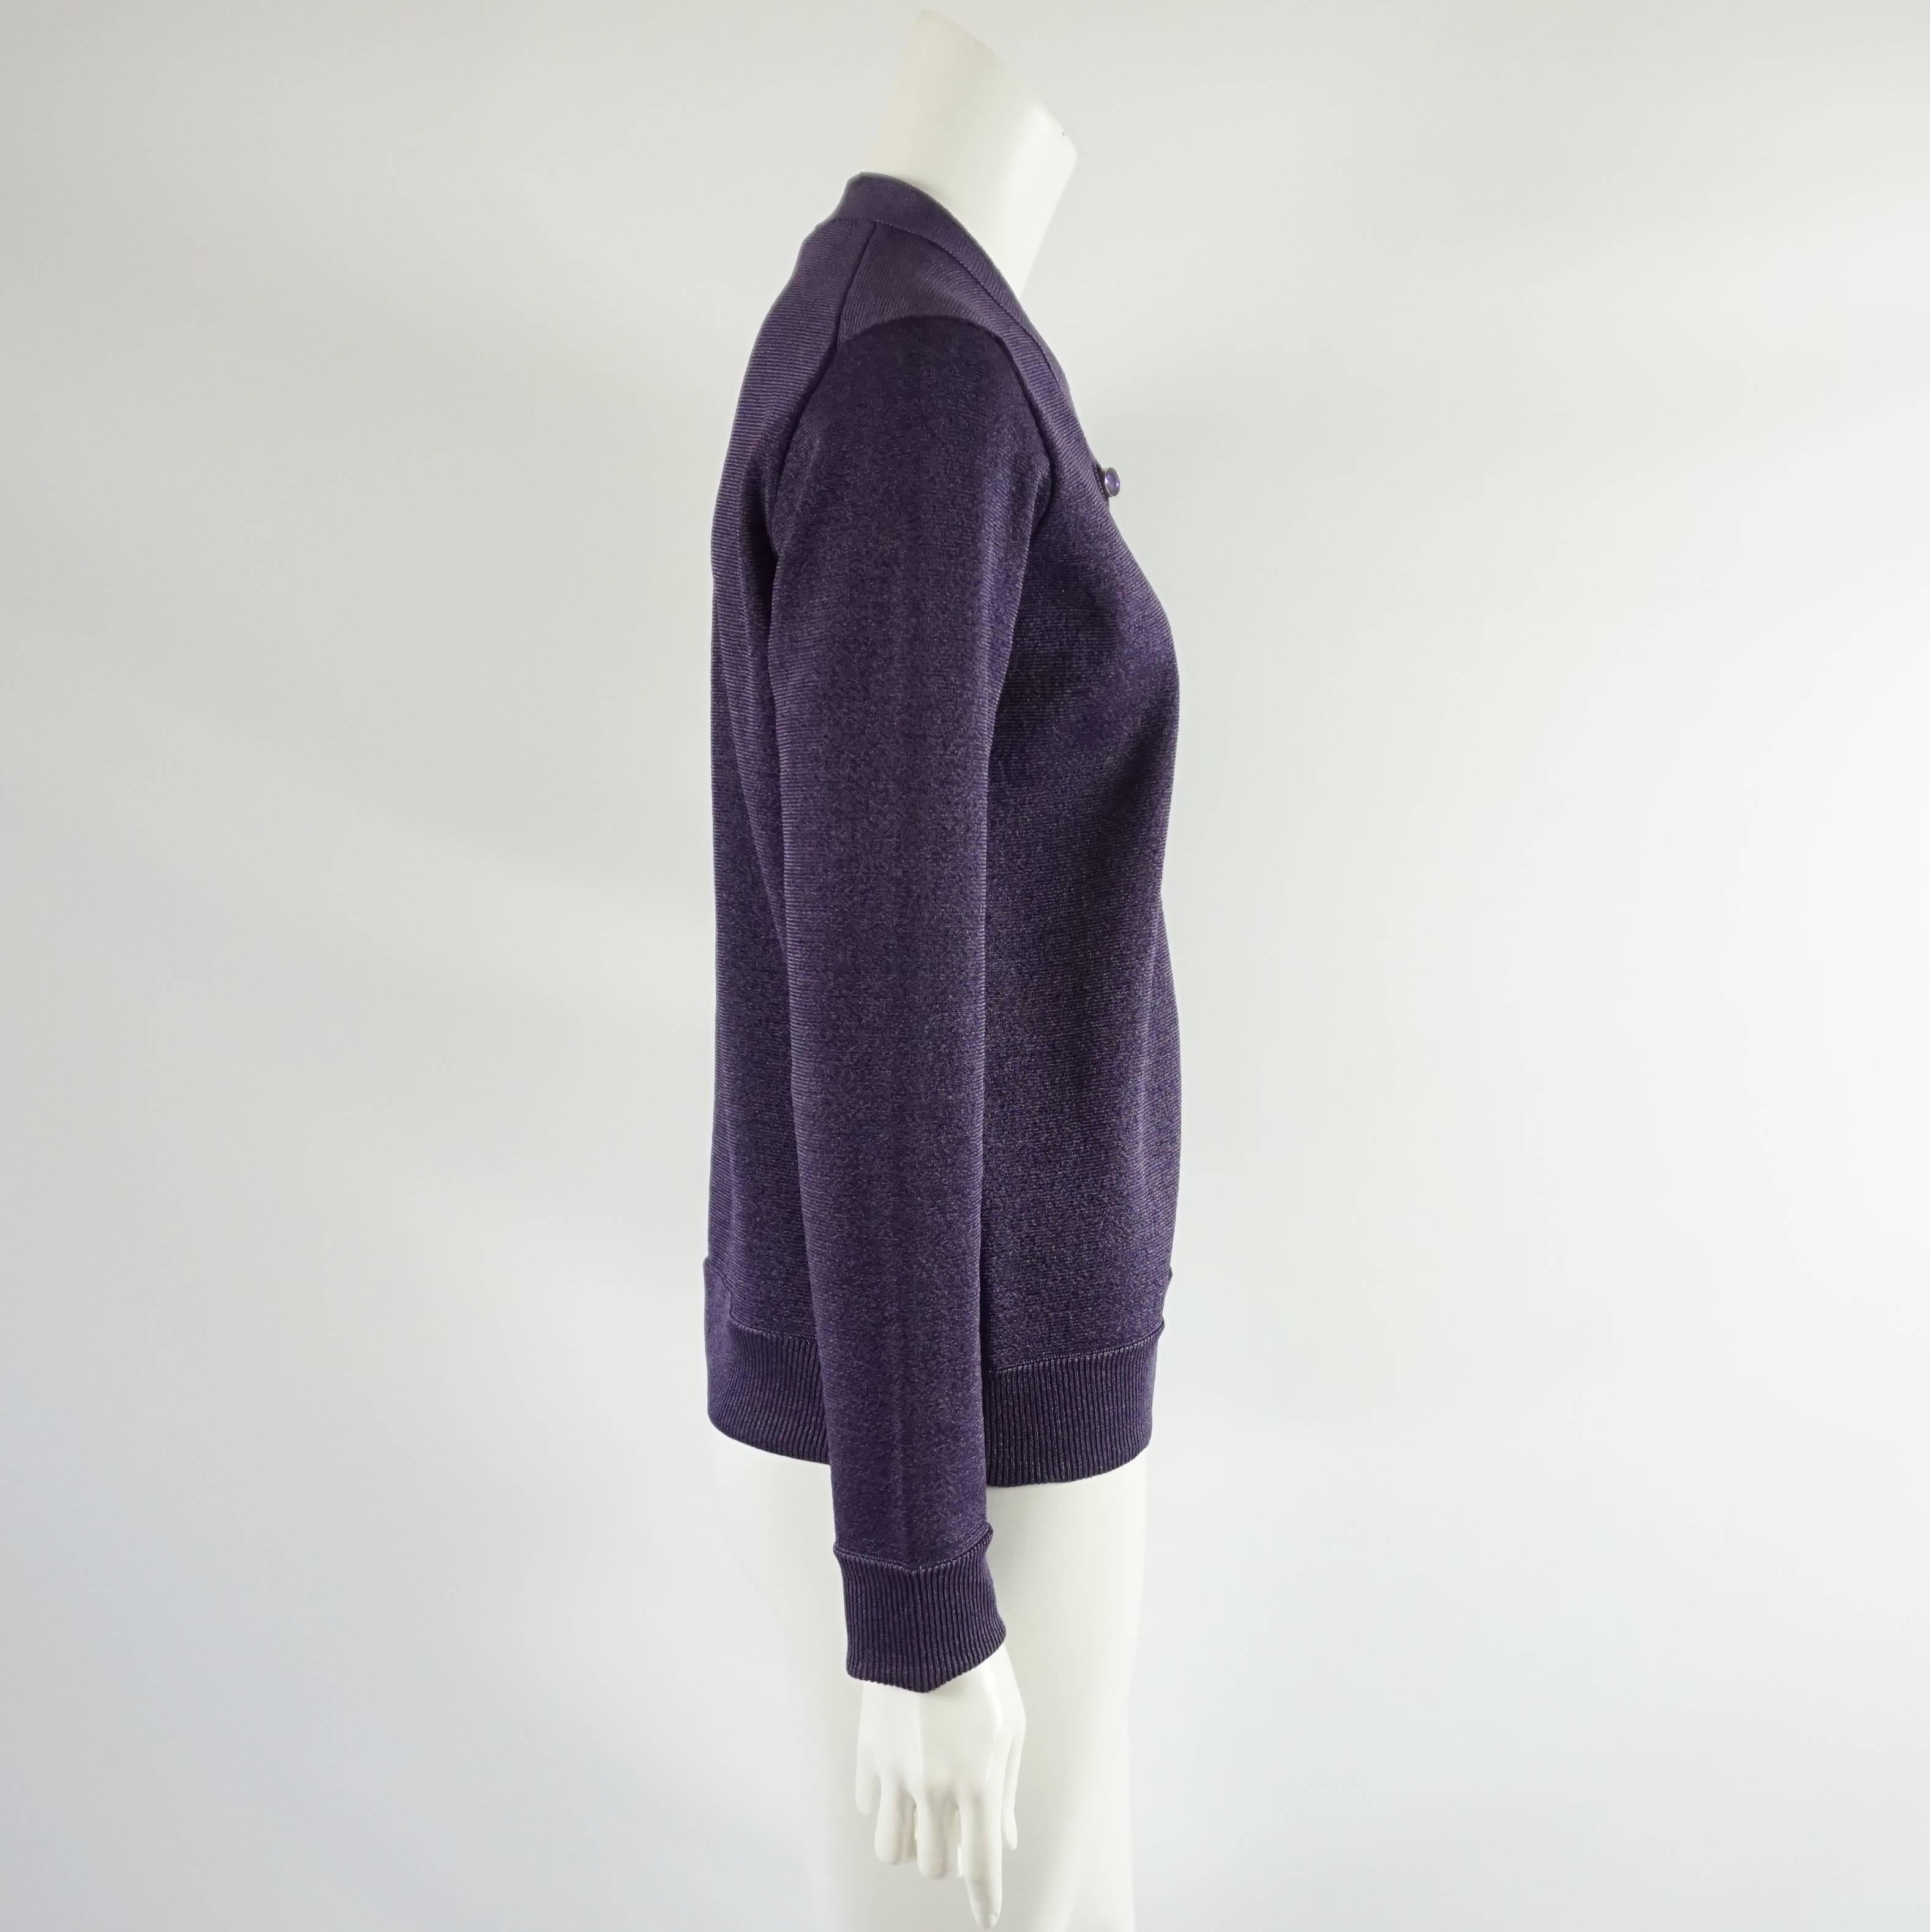 This Louis Vuitton cardigan is metallic purple. There are buttons going down the front that are large purple rhinestones. This cardigan is in excellent condition.

Measurements
Shoulder to Shoulder: 16